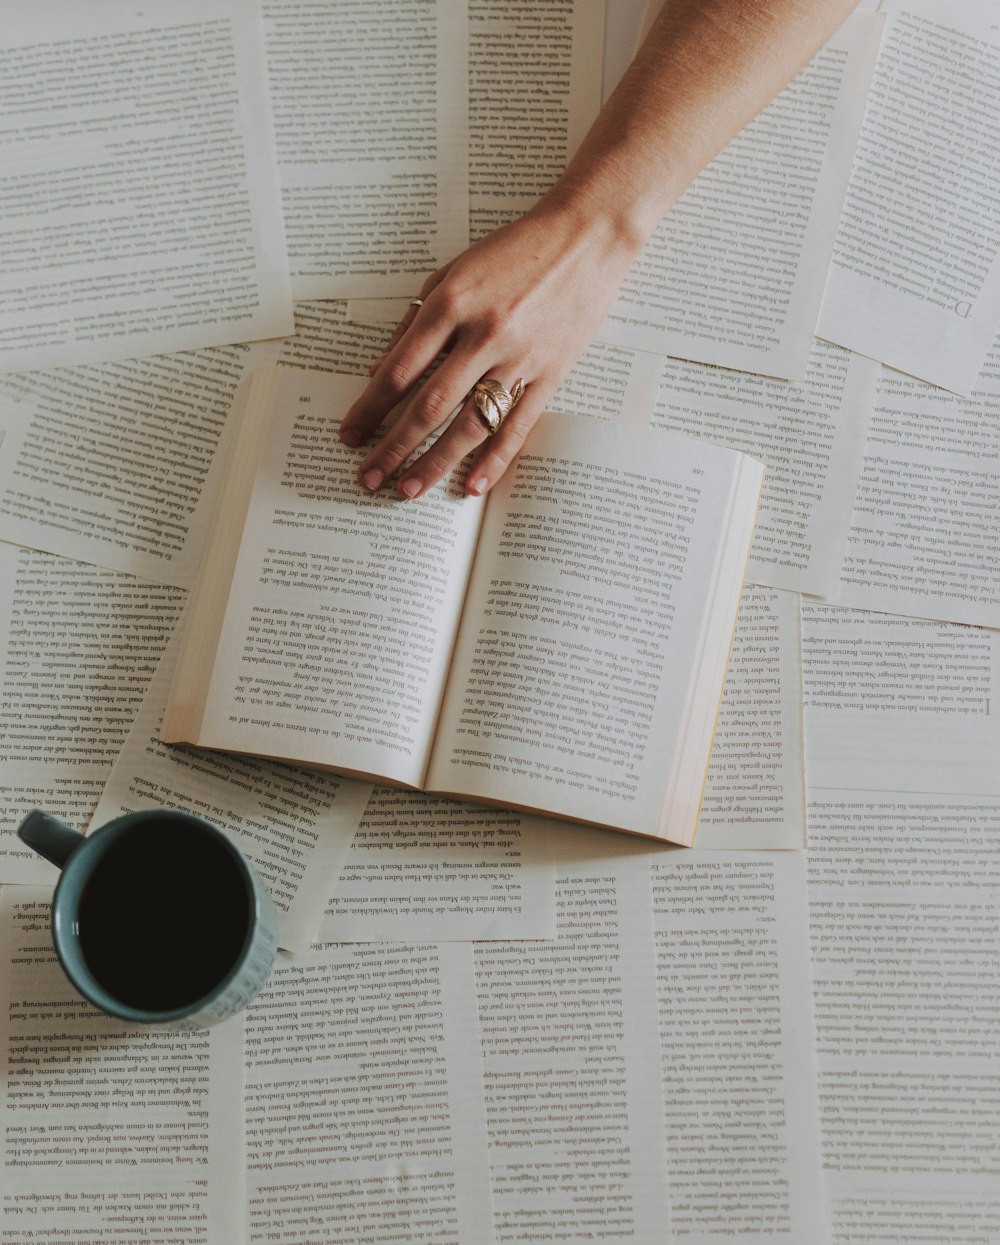 a person's hand on top of an open book next to a cup of